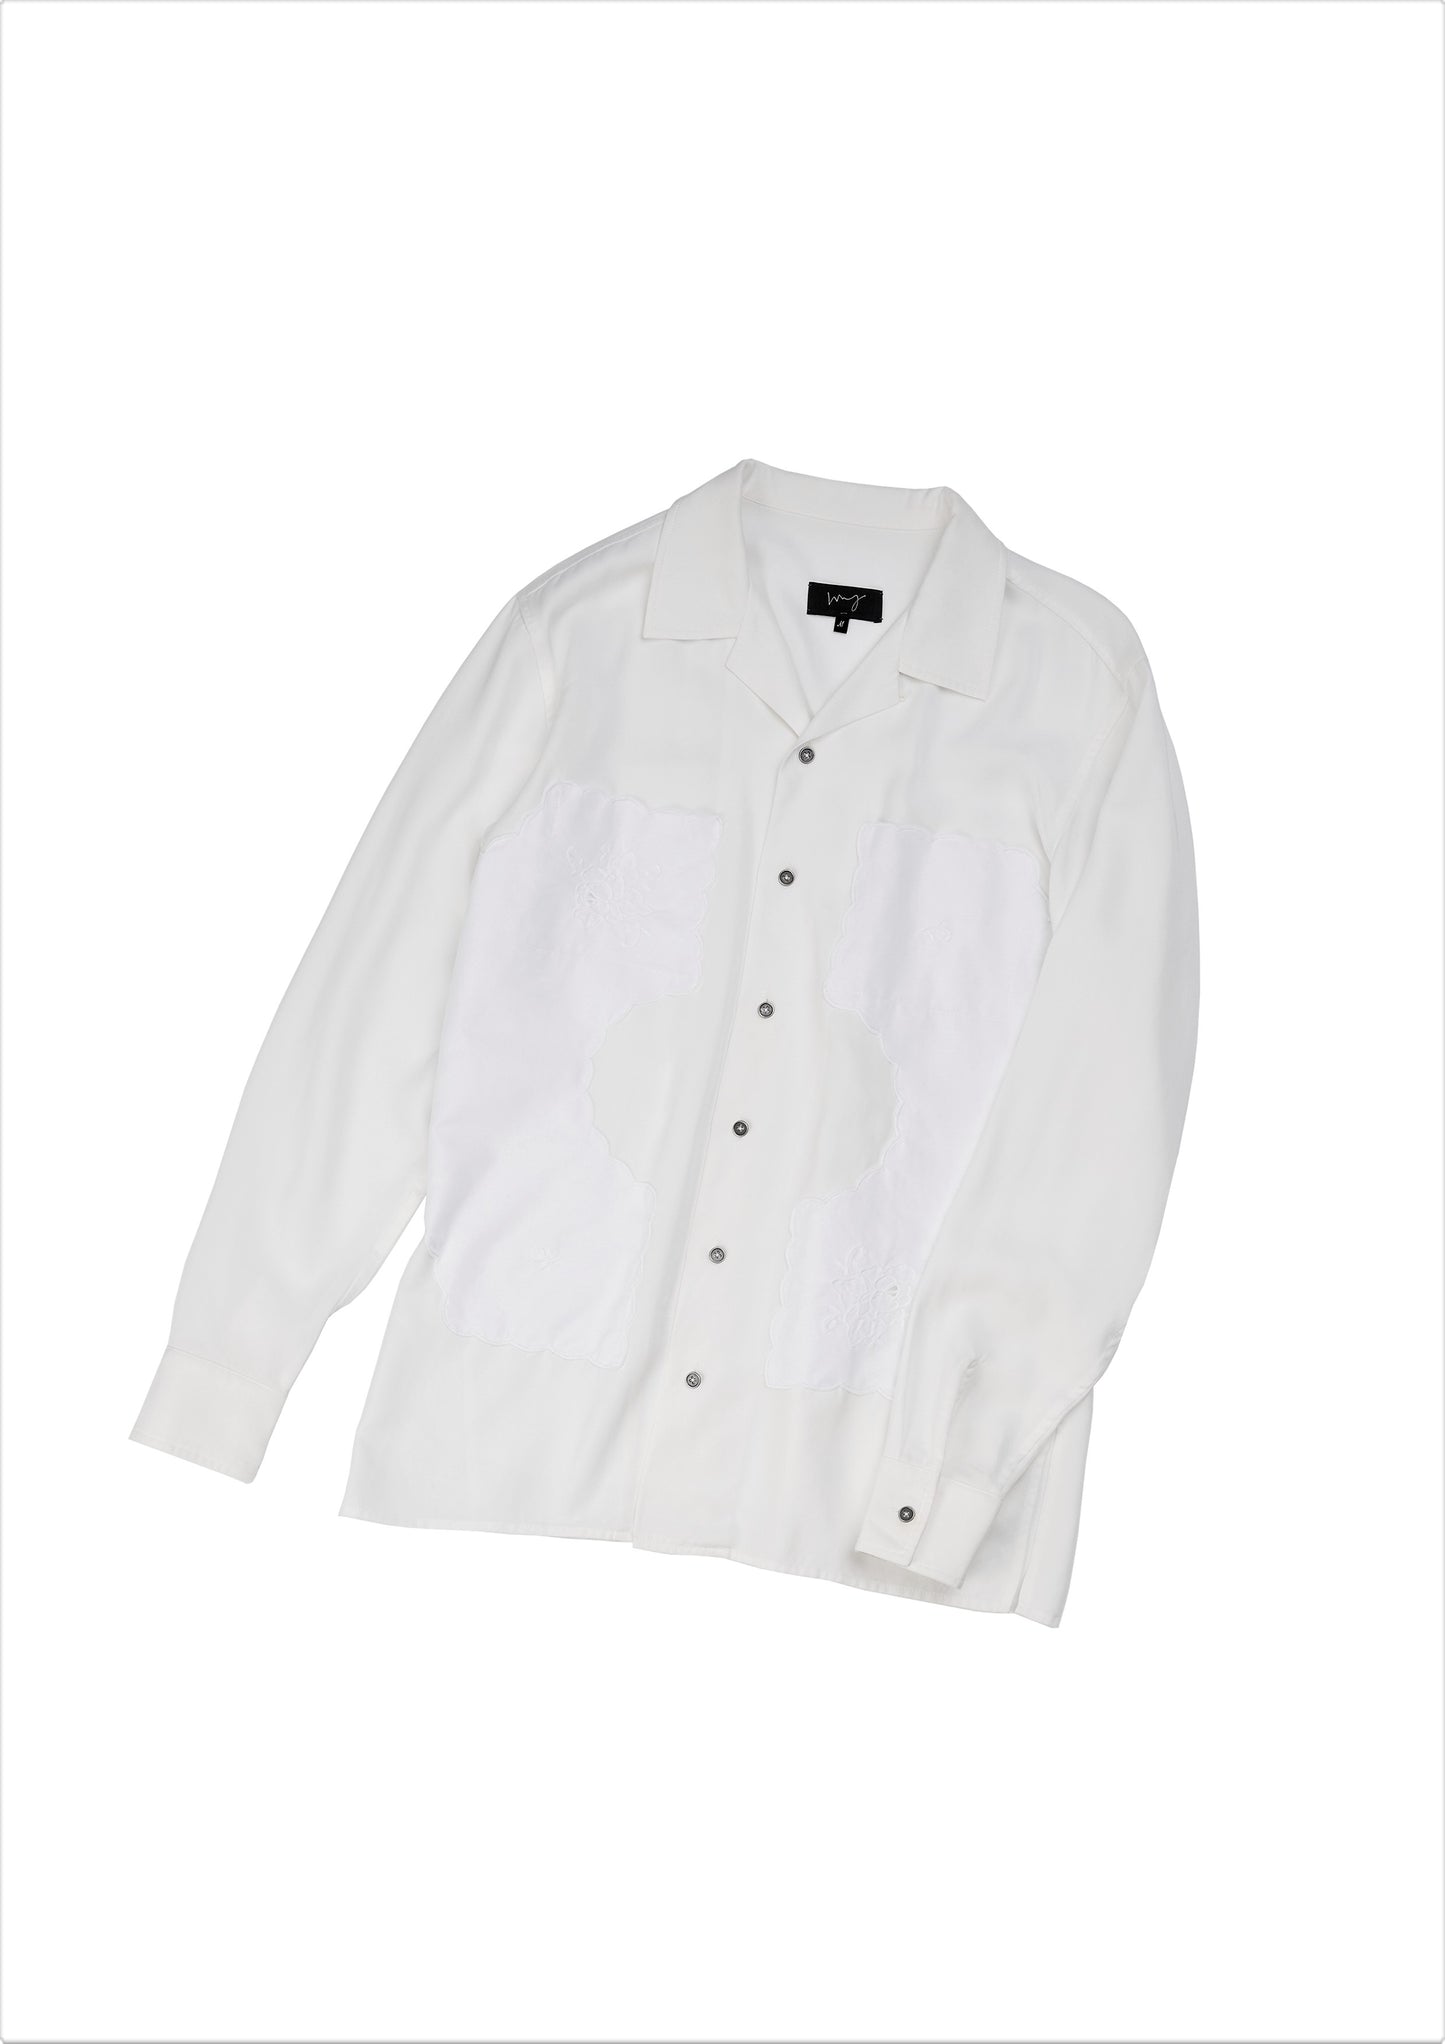 Tablecloth patched shirt